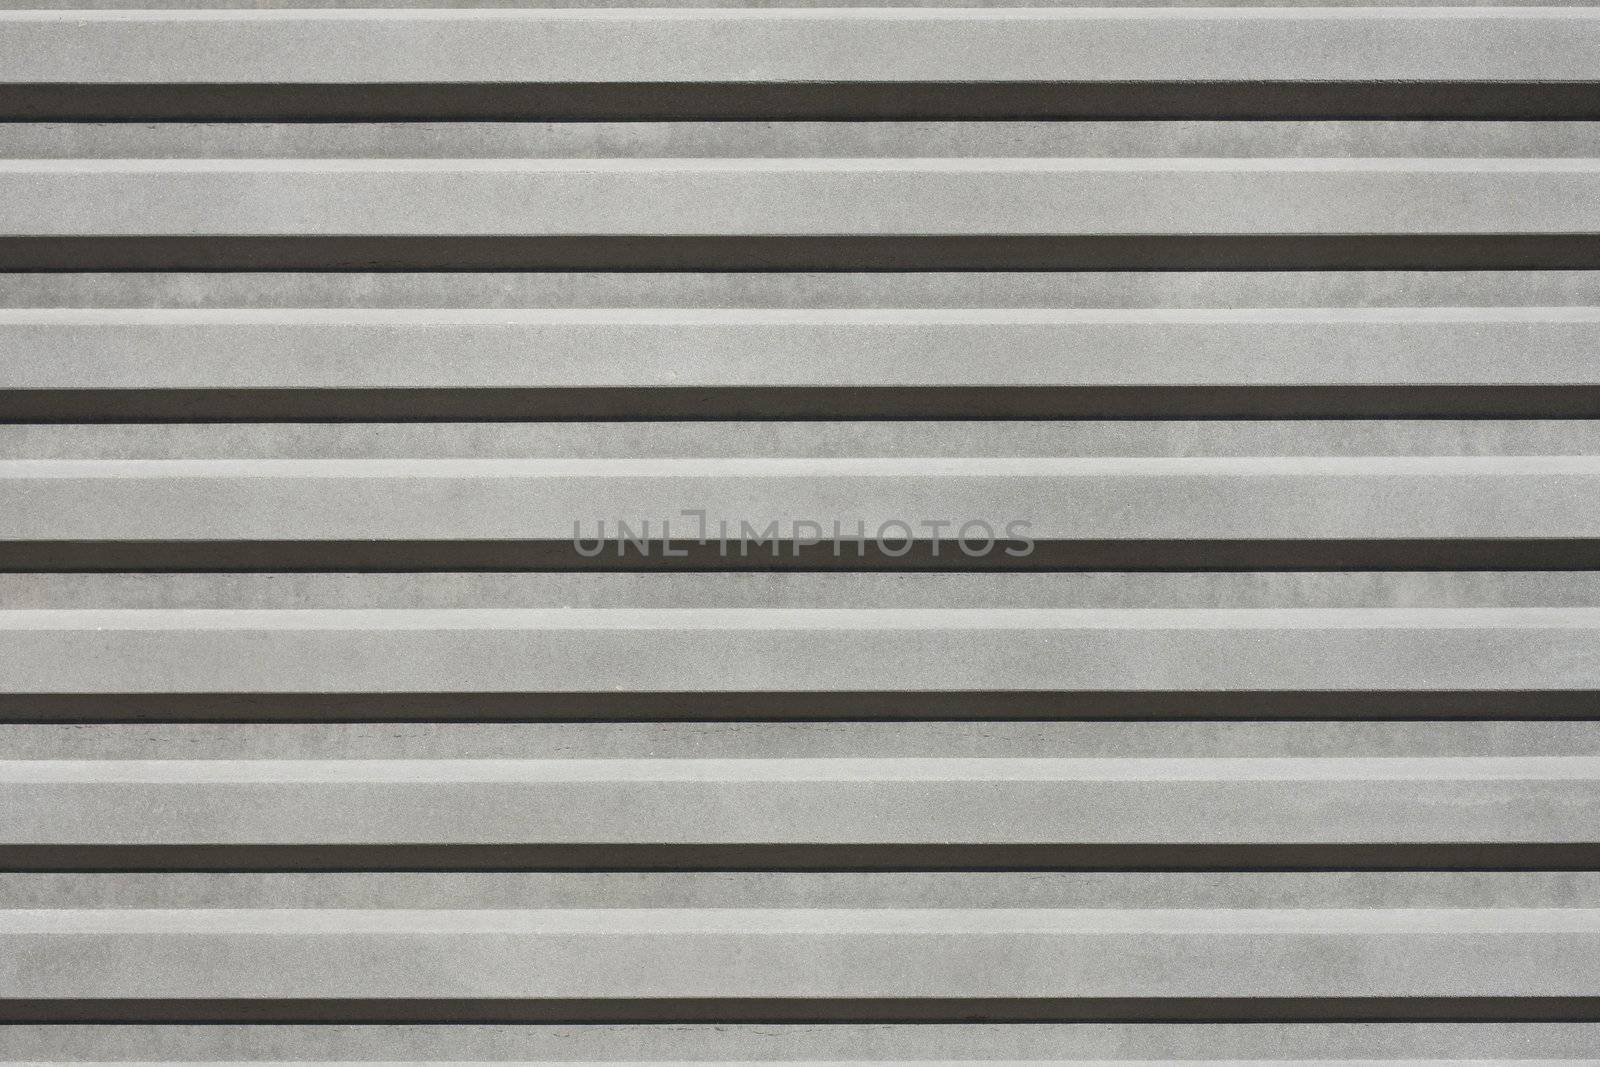 Closeup of Parallel Lines of a Concrete Wall